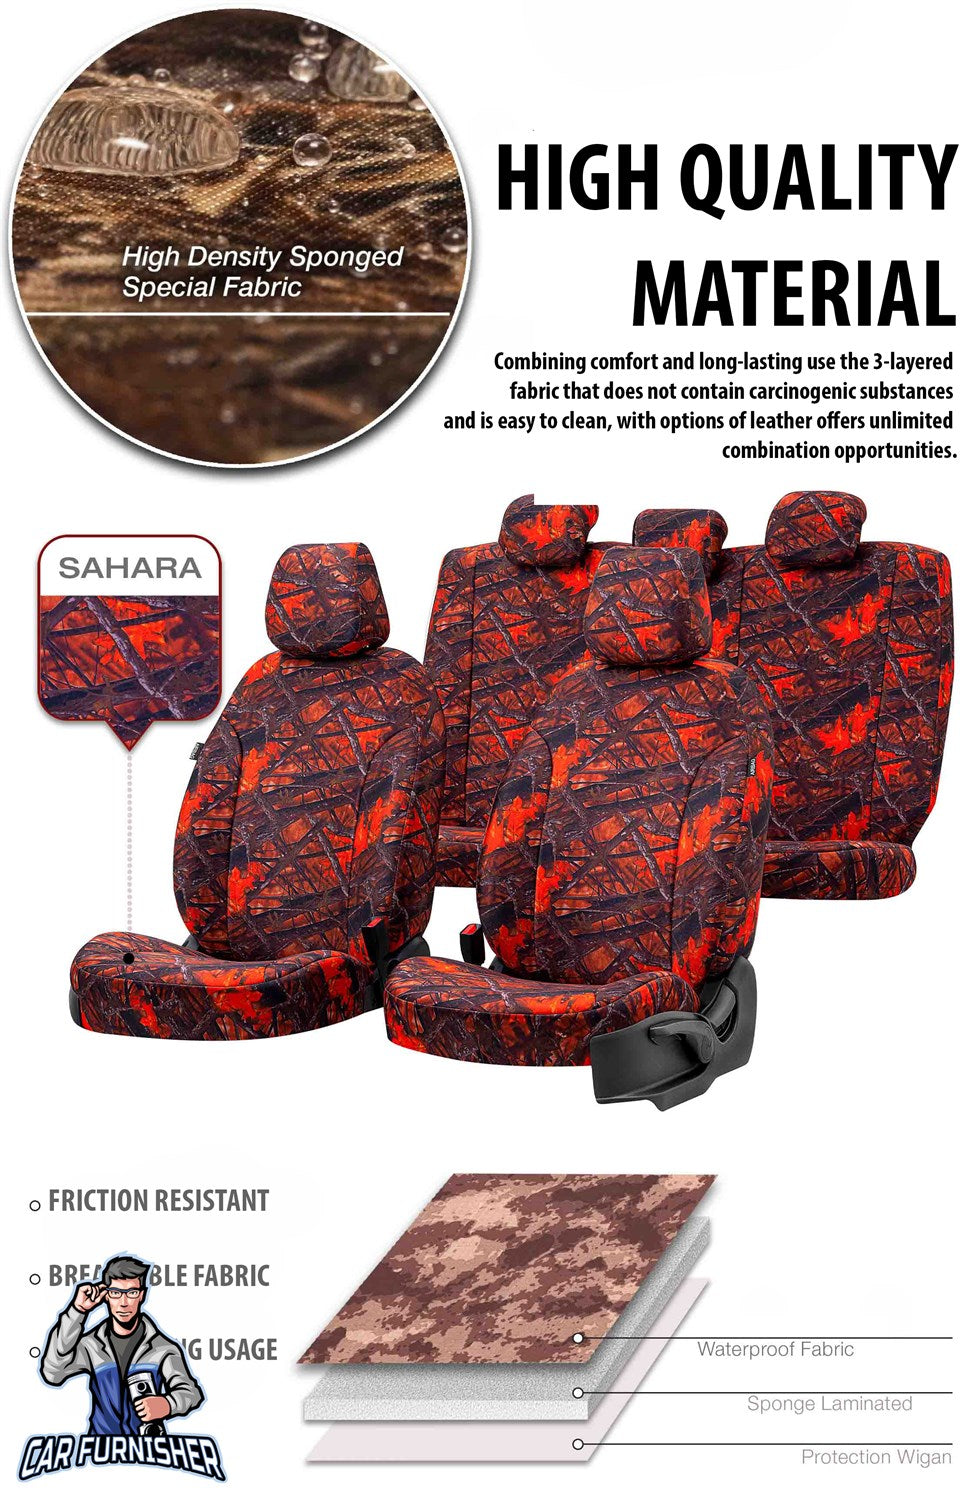 Fiat Tipo Seat Covers Camouflage Waterproof Design Alps Camo Waterproof Fabric